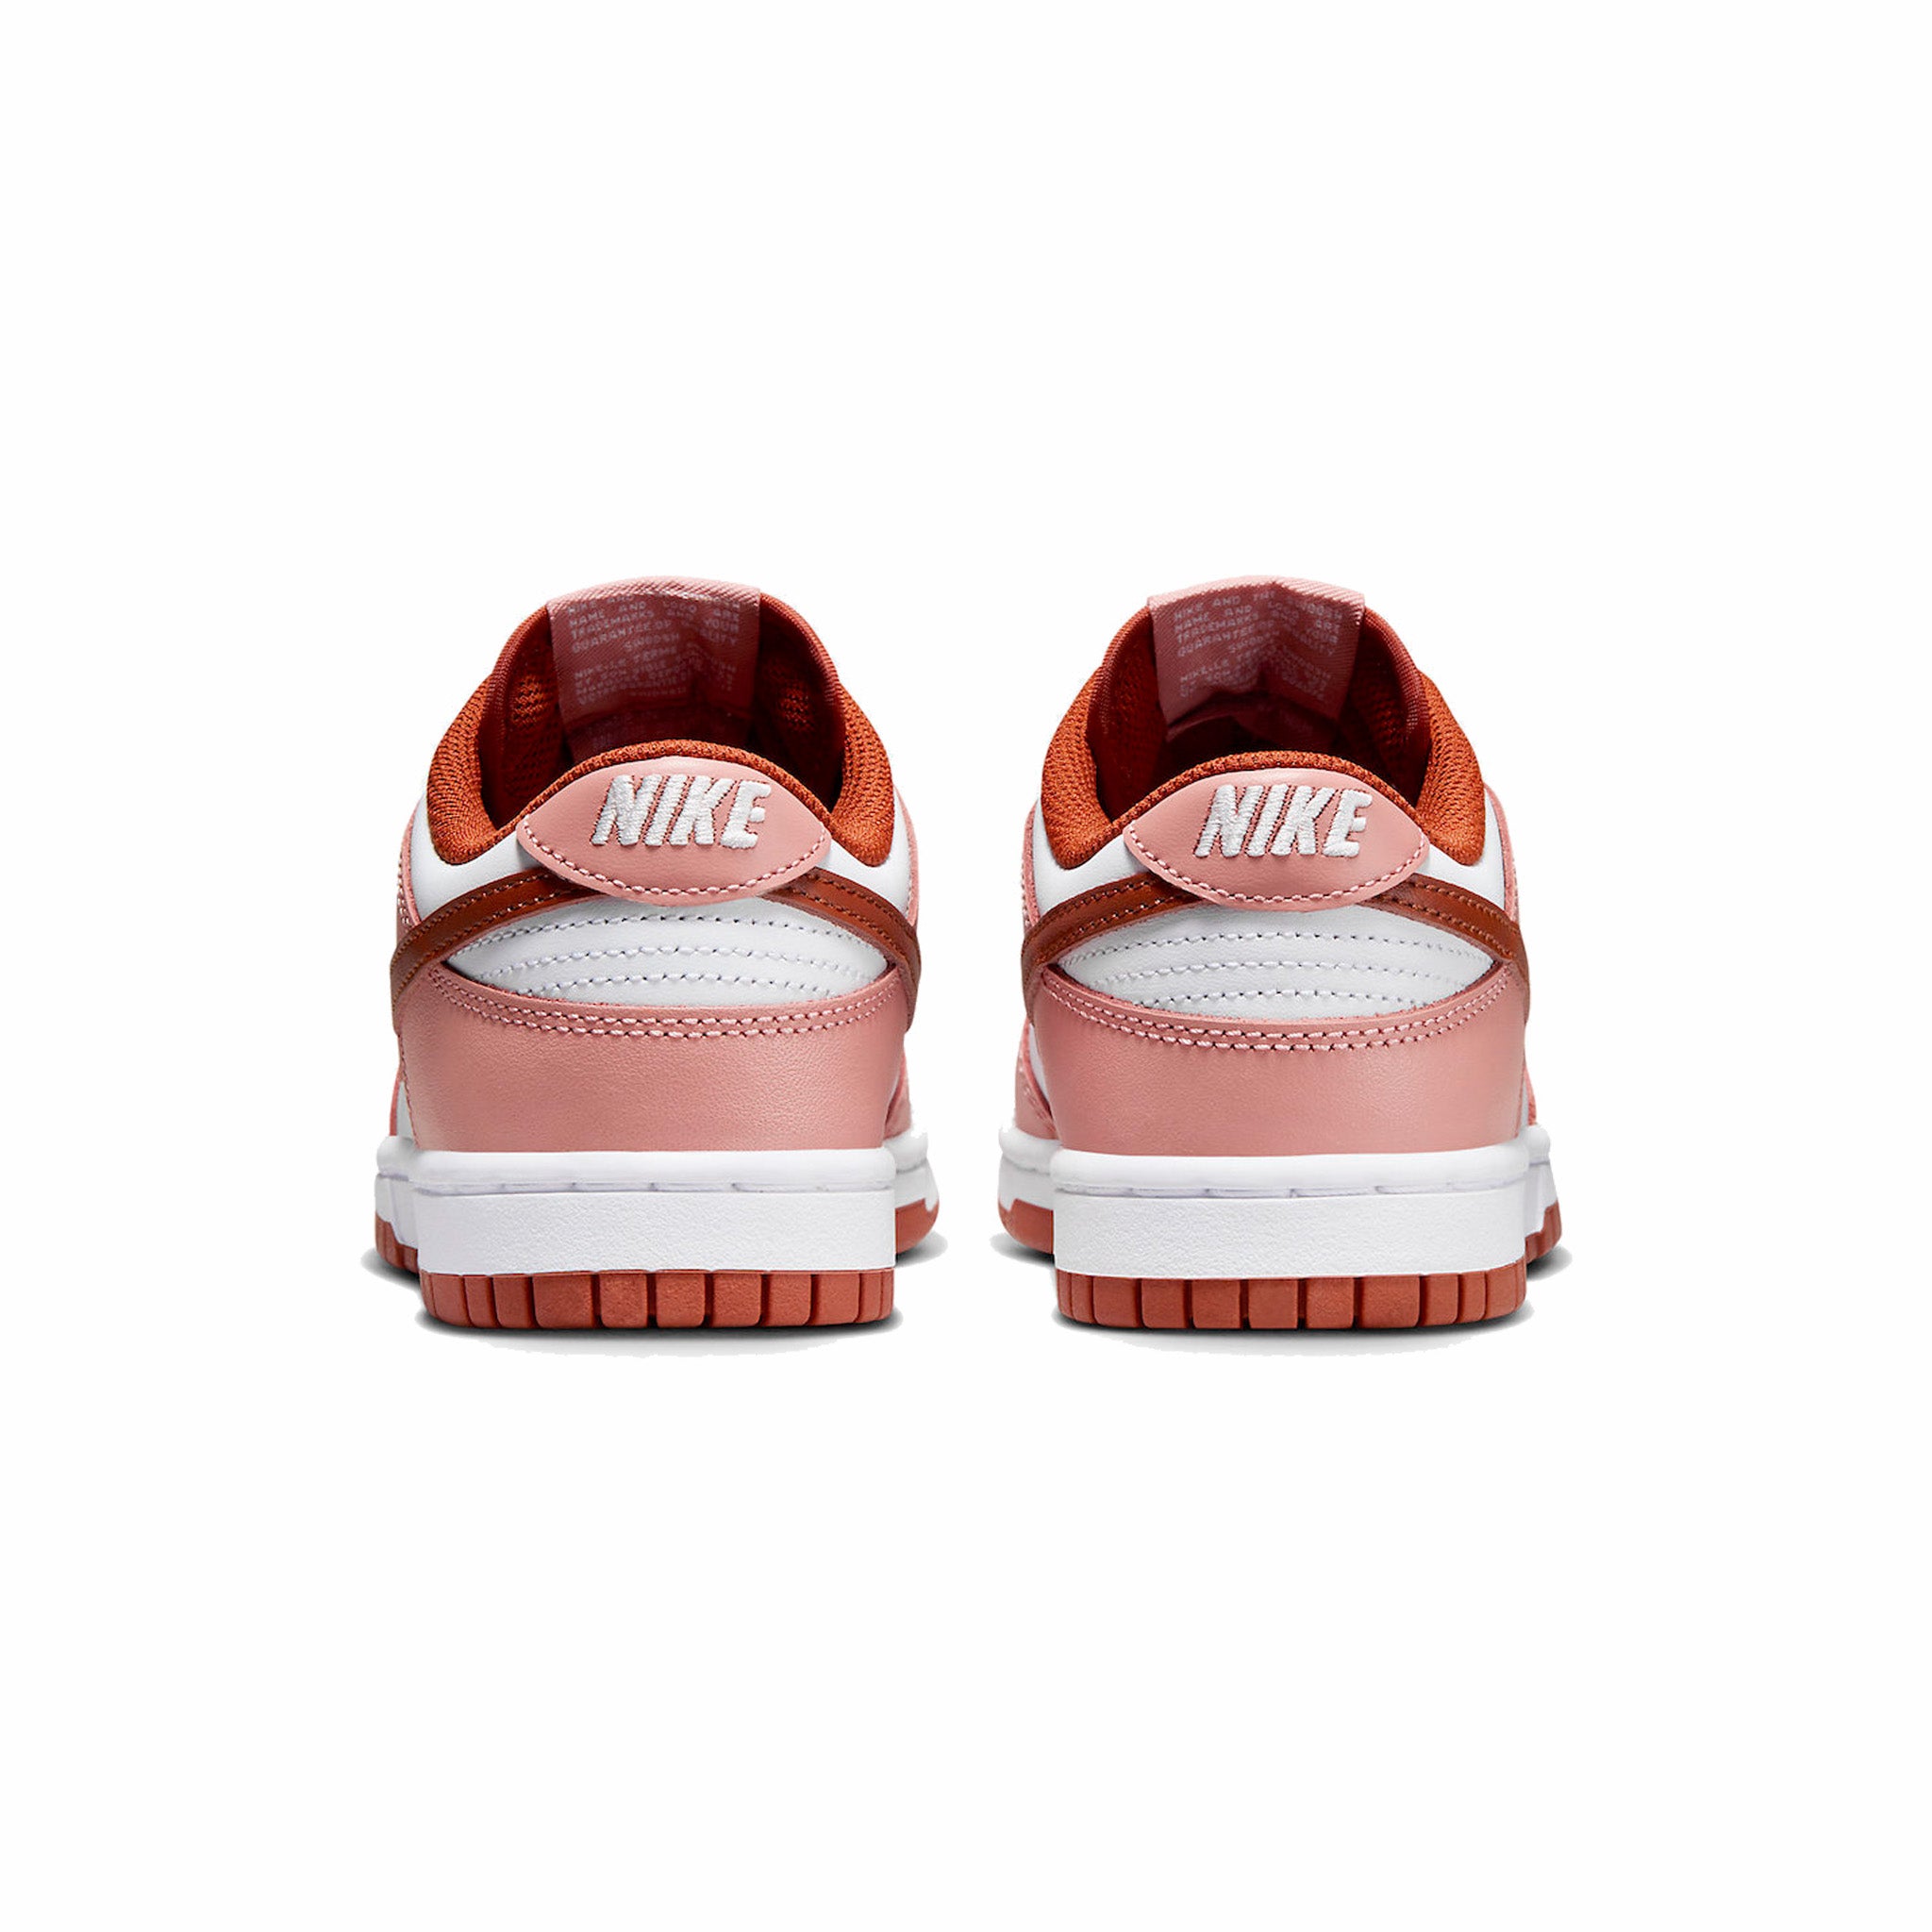 Nike Dunk Low Women’s “Red Stardust” (Red Stardust/Rugged Orange) - August Shop